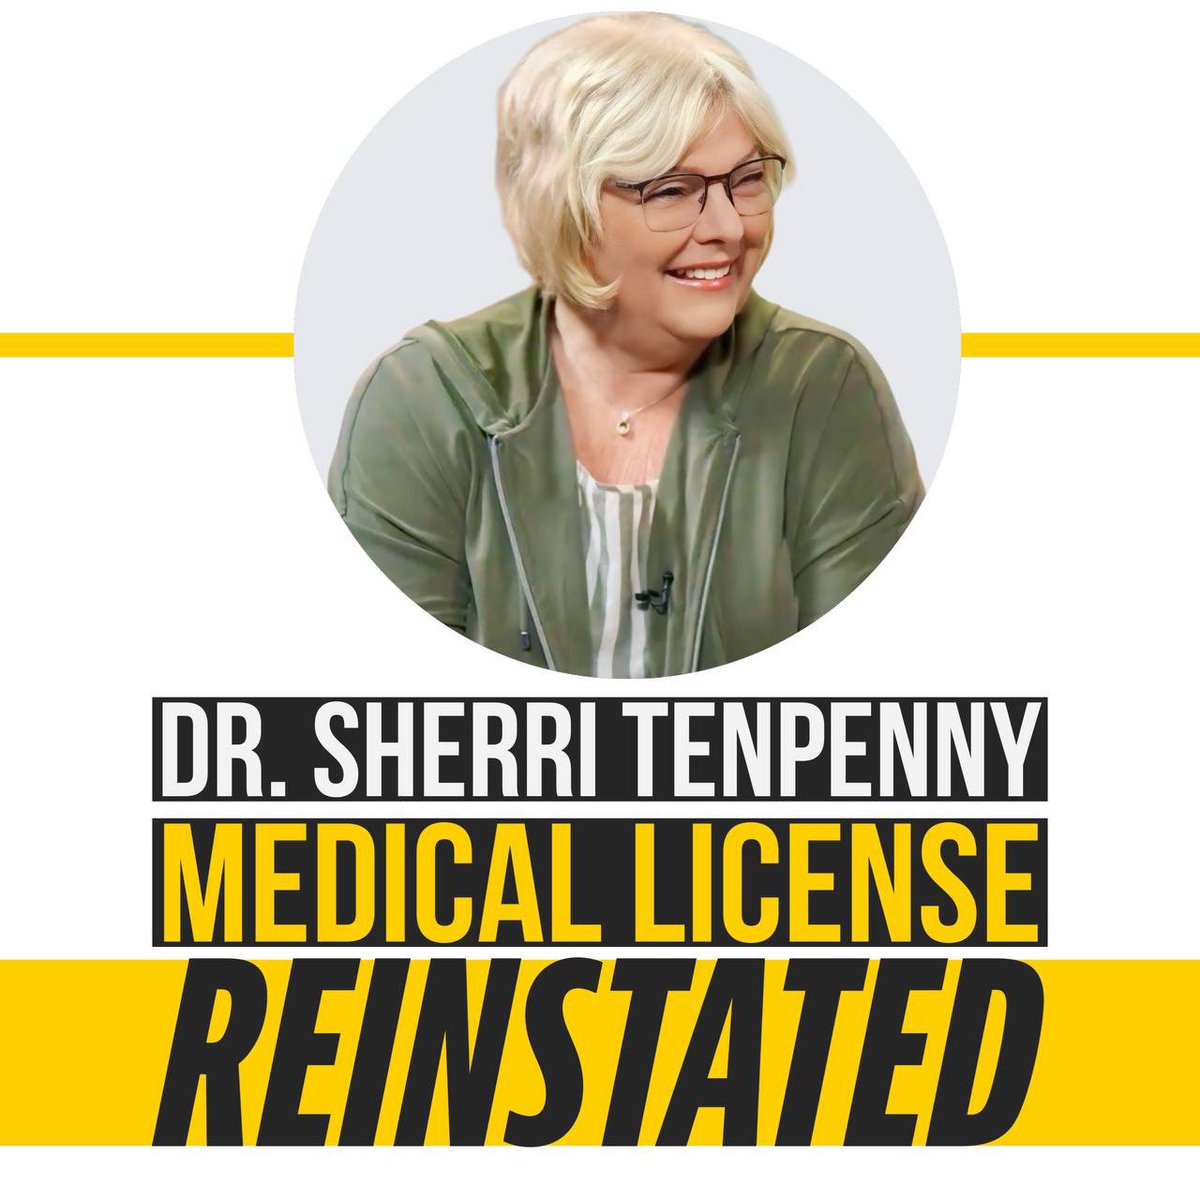 Standing strong and steadfast! I'm thrilled to share that my medical license has been reinstated. Thank you all for your unwavering love and support but most importantly for your prayers during these challenging times.